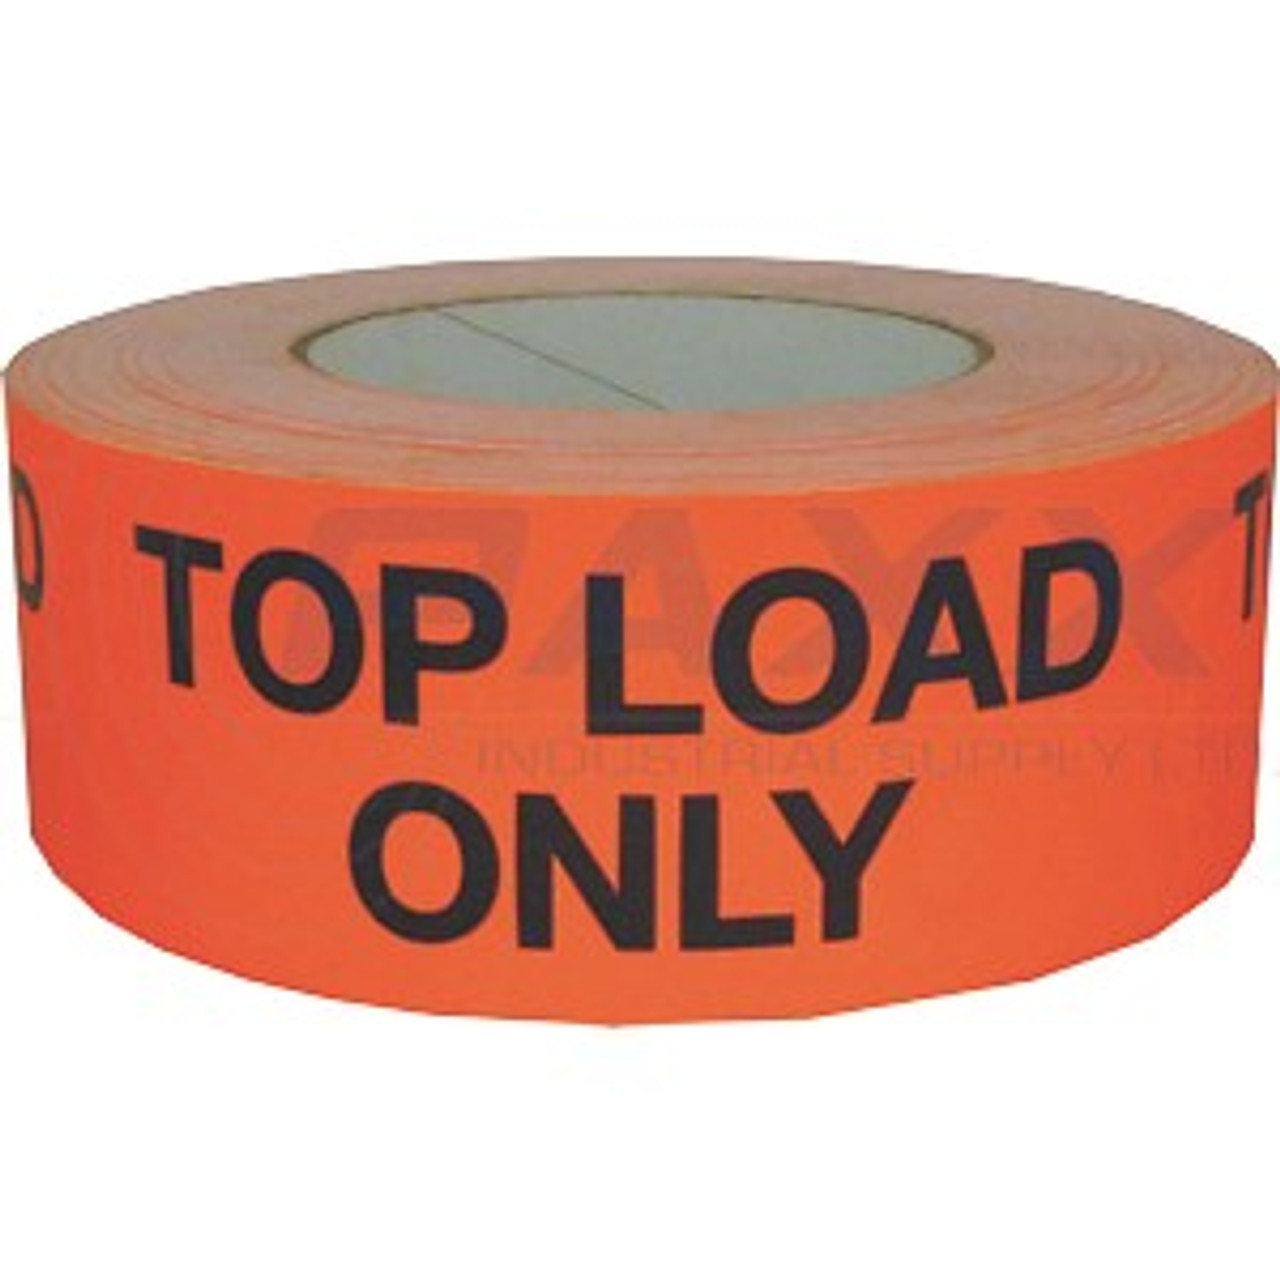 TOP LOAD ONLY  2" x 5" Label